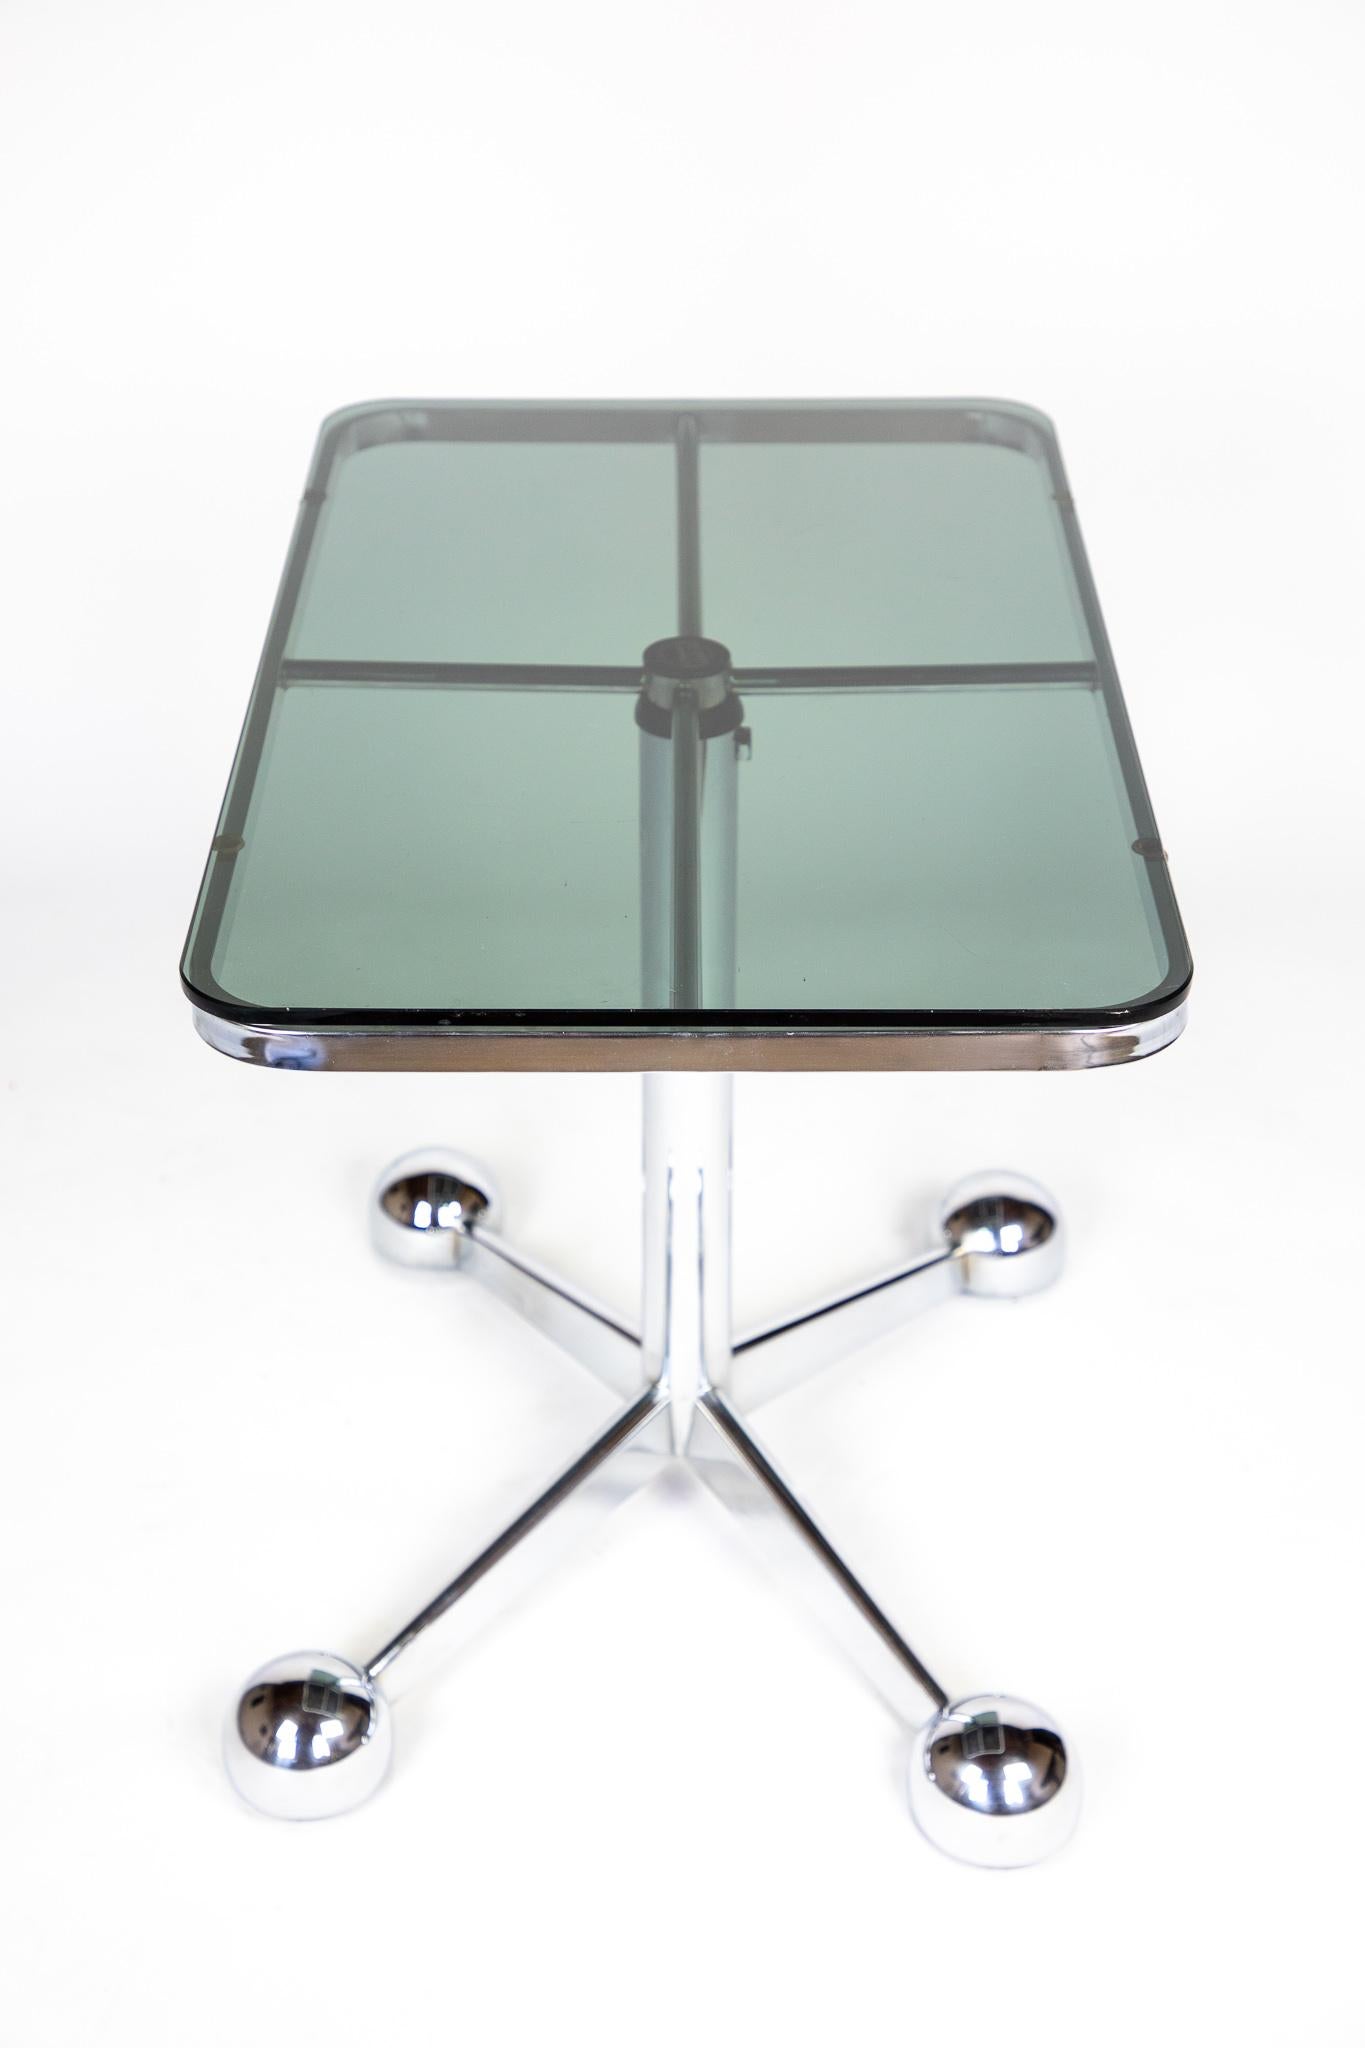 Mid Century Modern Side Table on Castors, Glass, Chrome plated, Italy, 1970s.

Extraordinary mid-century Space Age coffee table in chromed steel with a glass top and futuristic round feet on wheels from the early 1970s made by the manufacturer